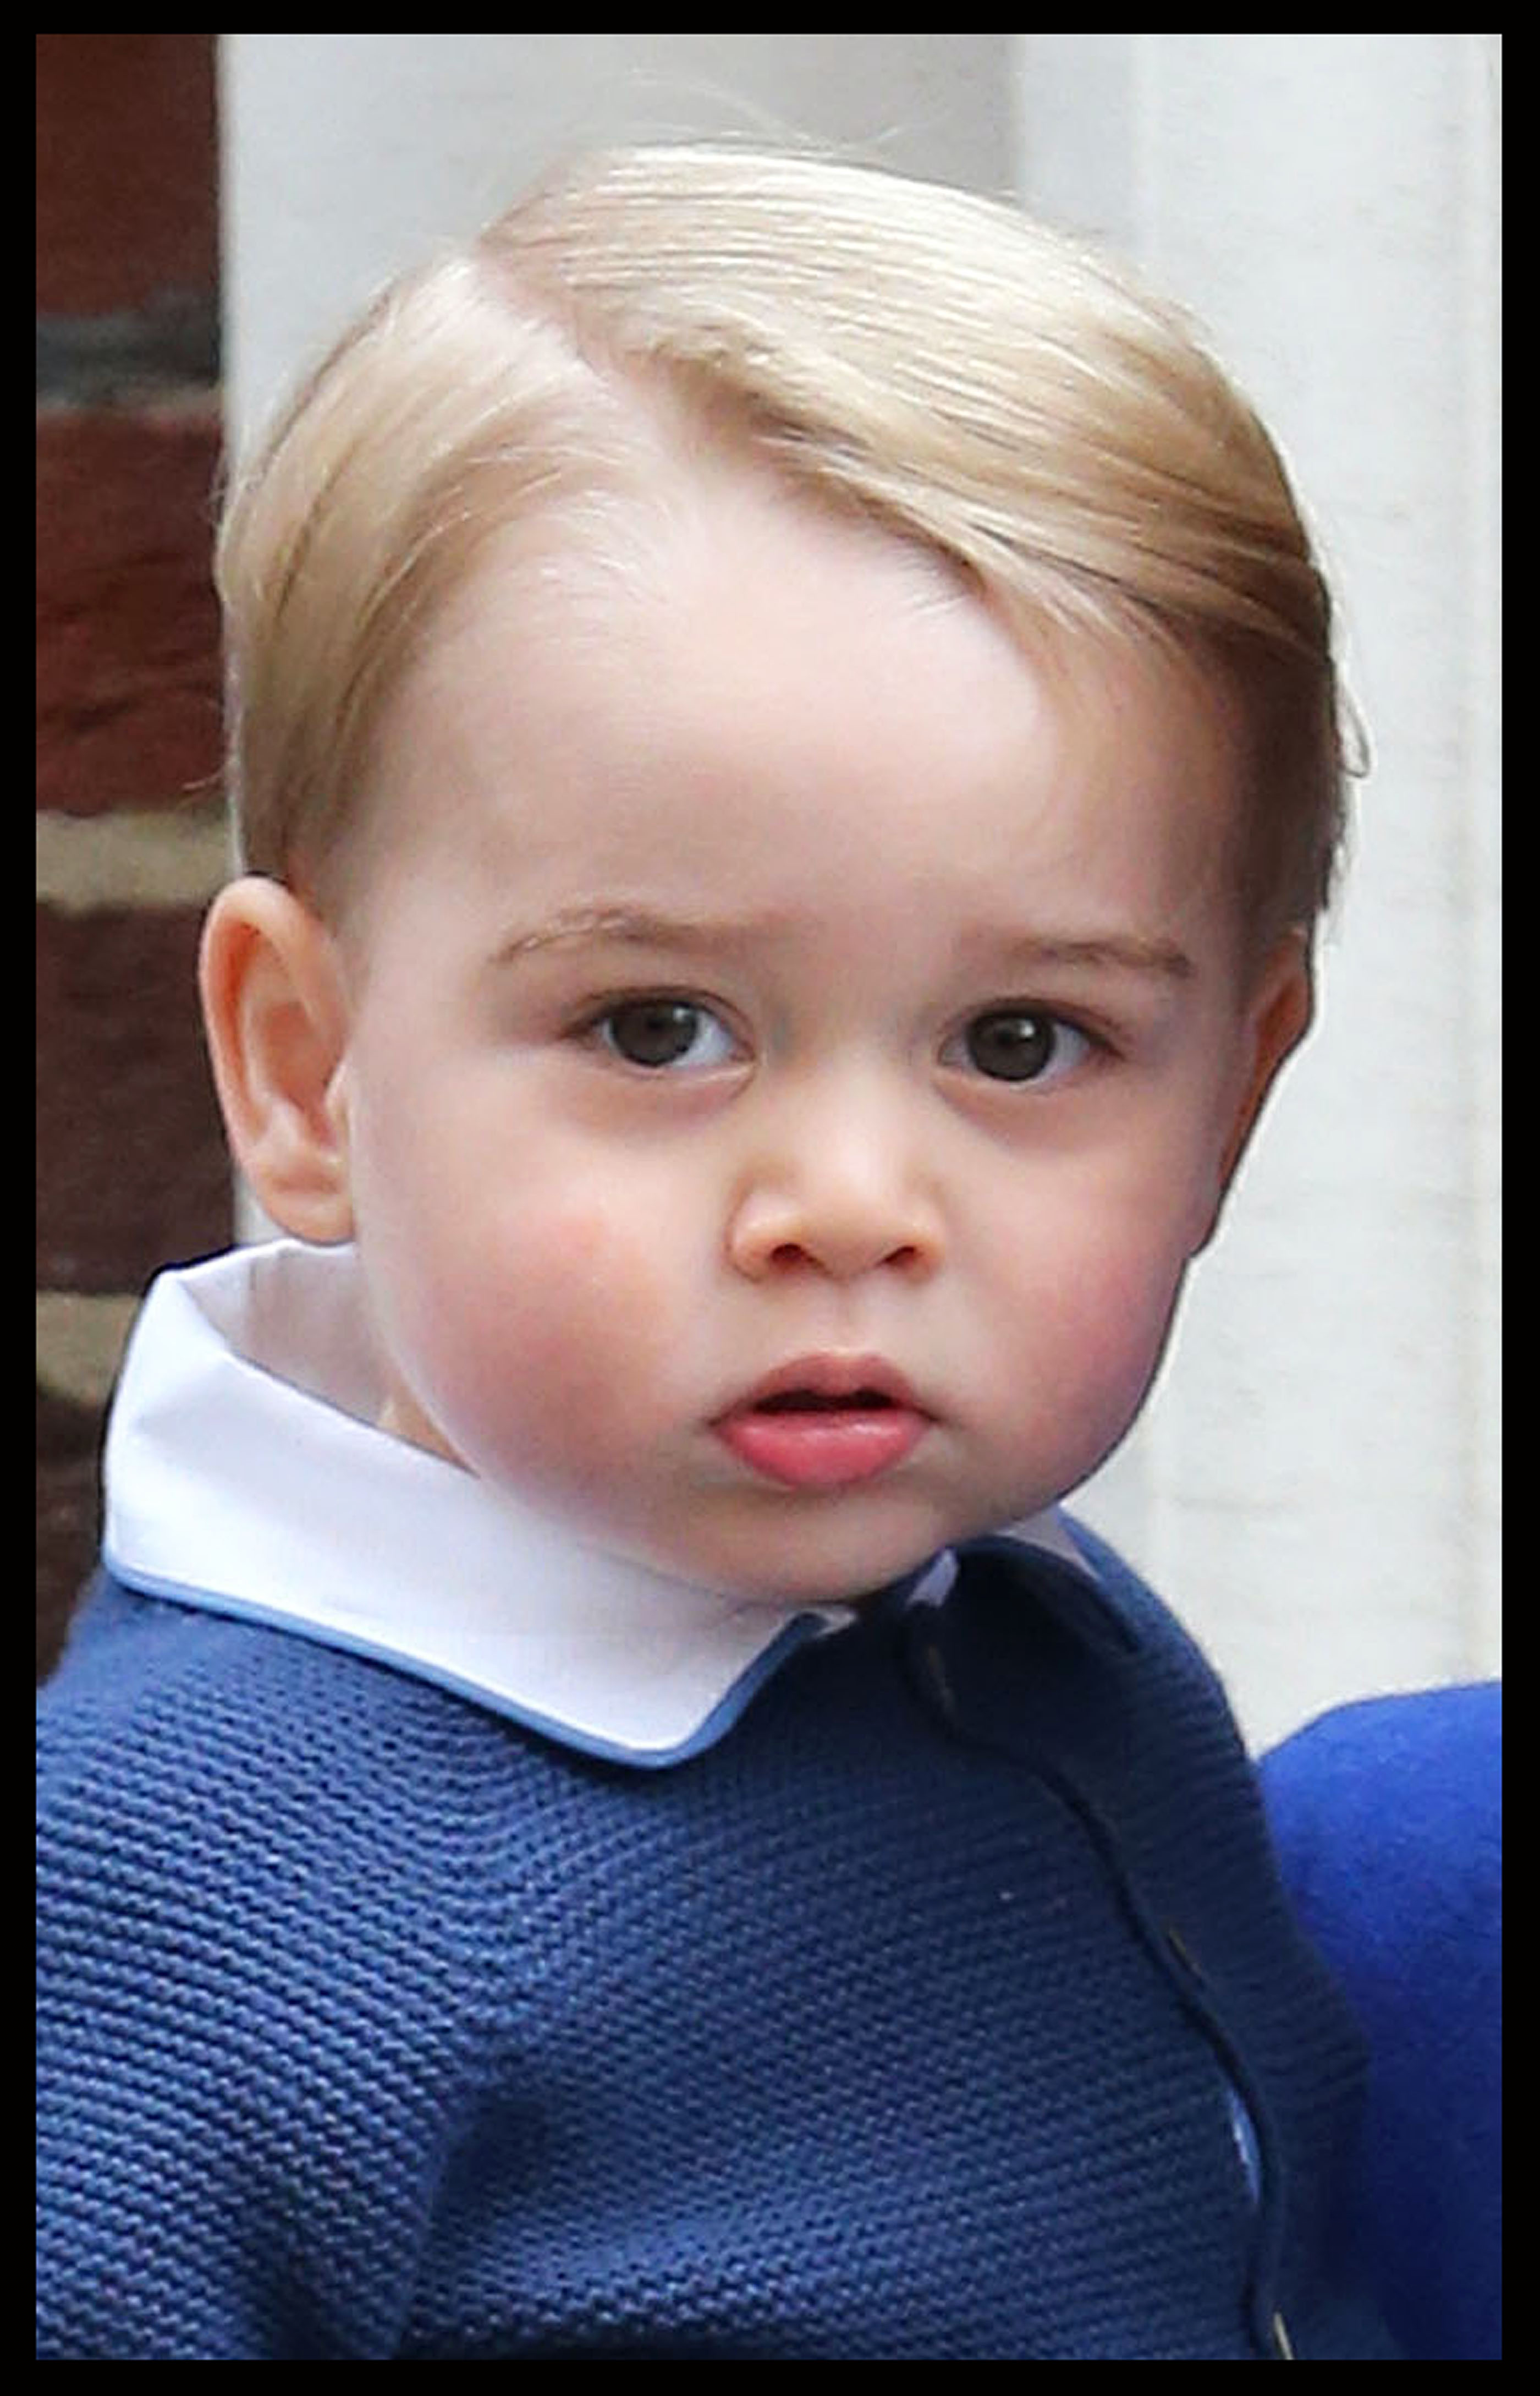 His Royal Highness Prince George Alexander Louis of Cambridge